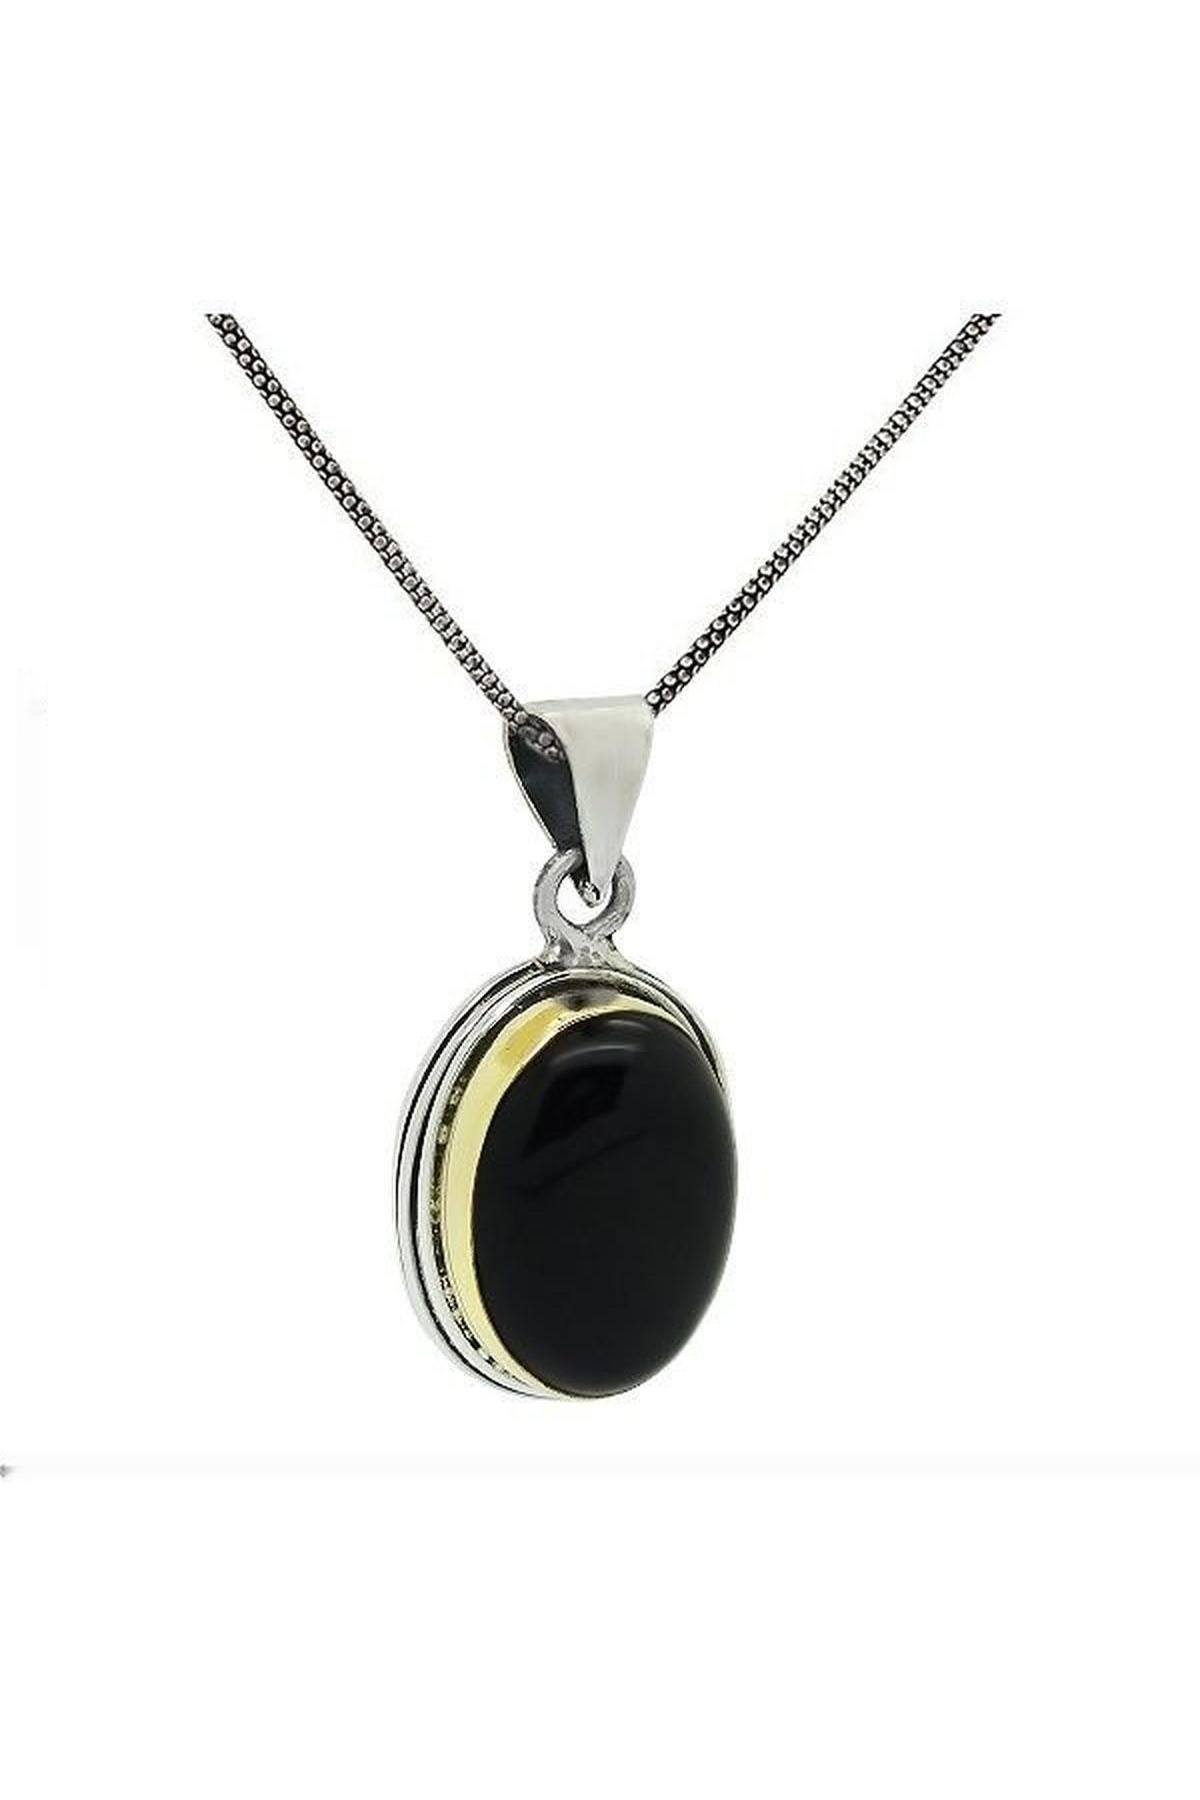 Sarma Series Natural Black Onyx Stone Authentic Sterling Silver Women's Necklace